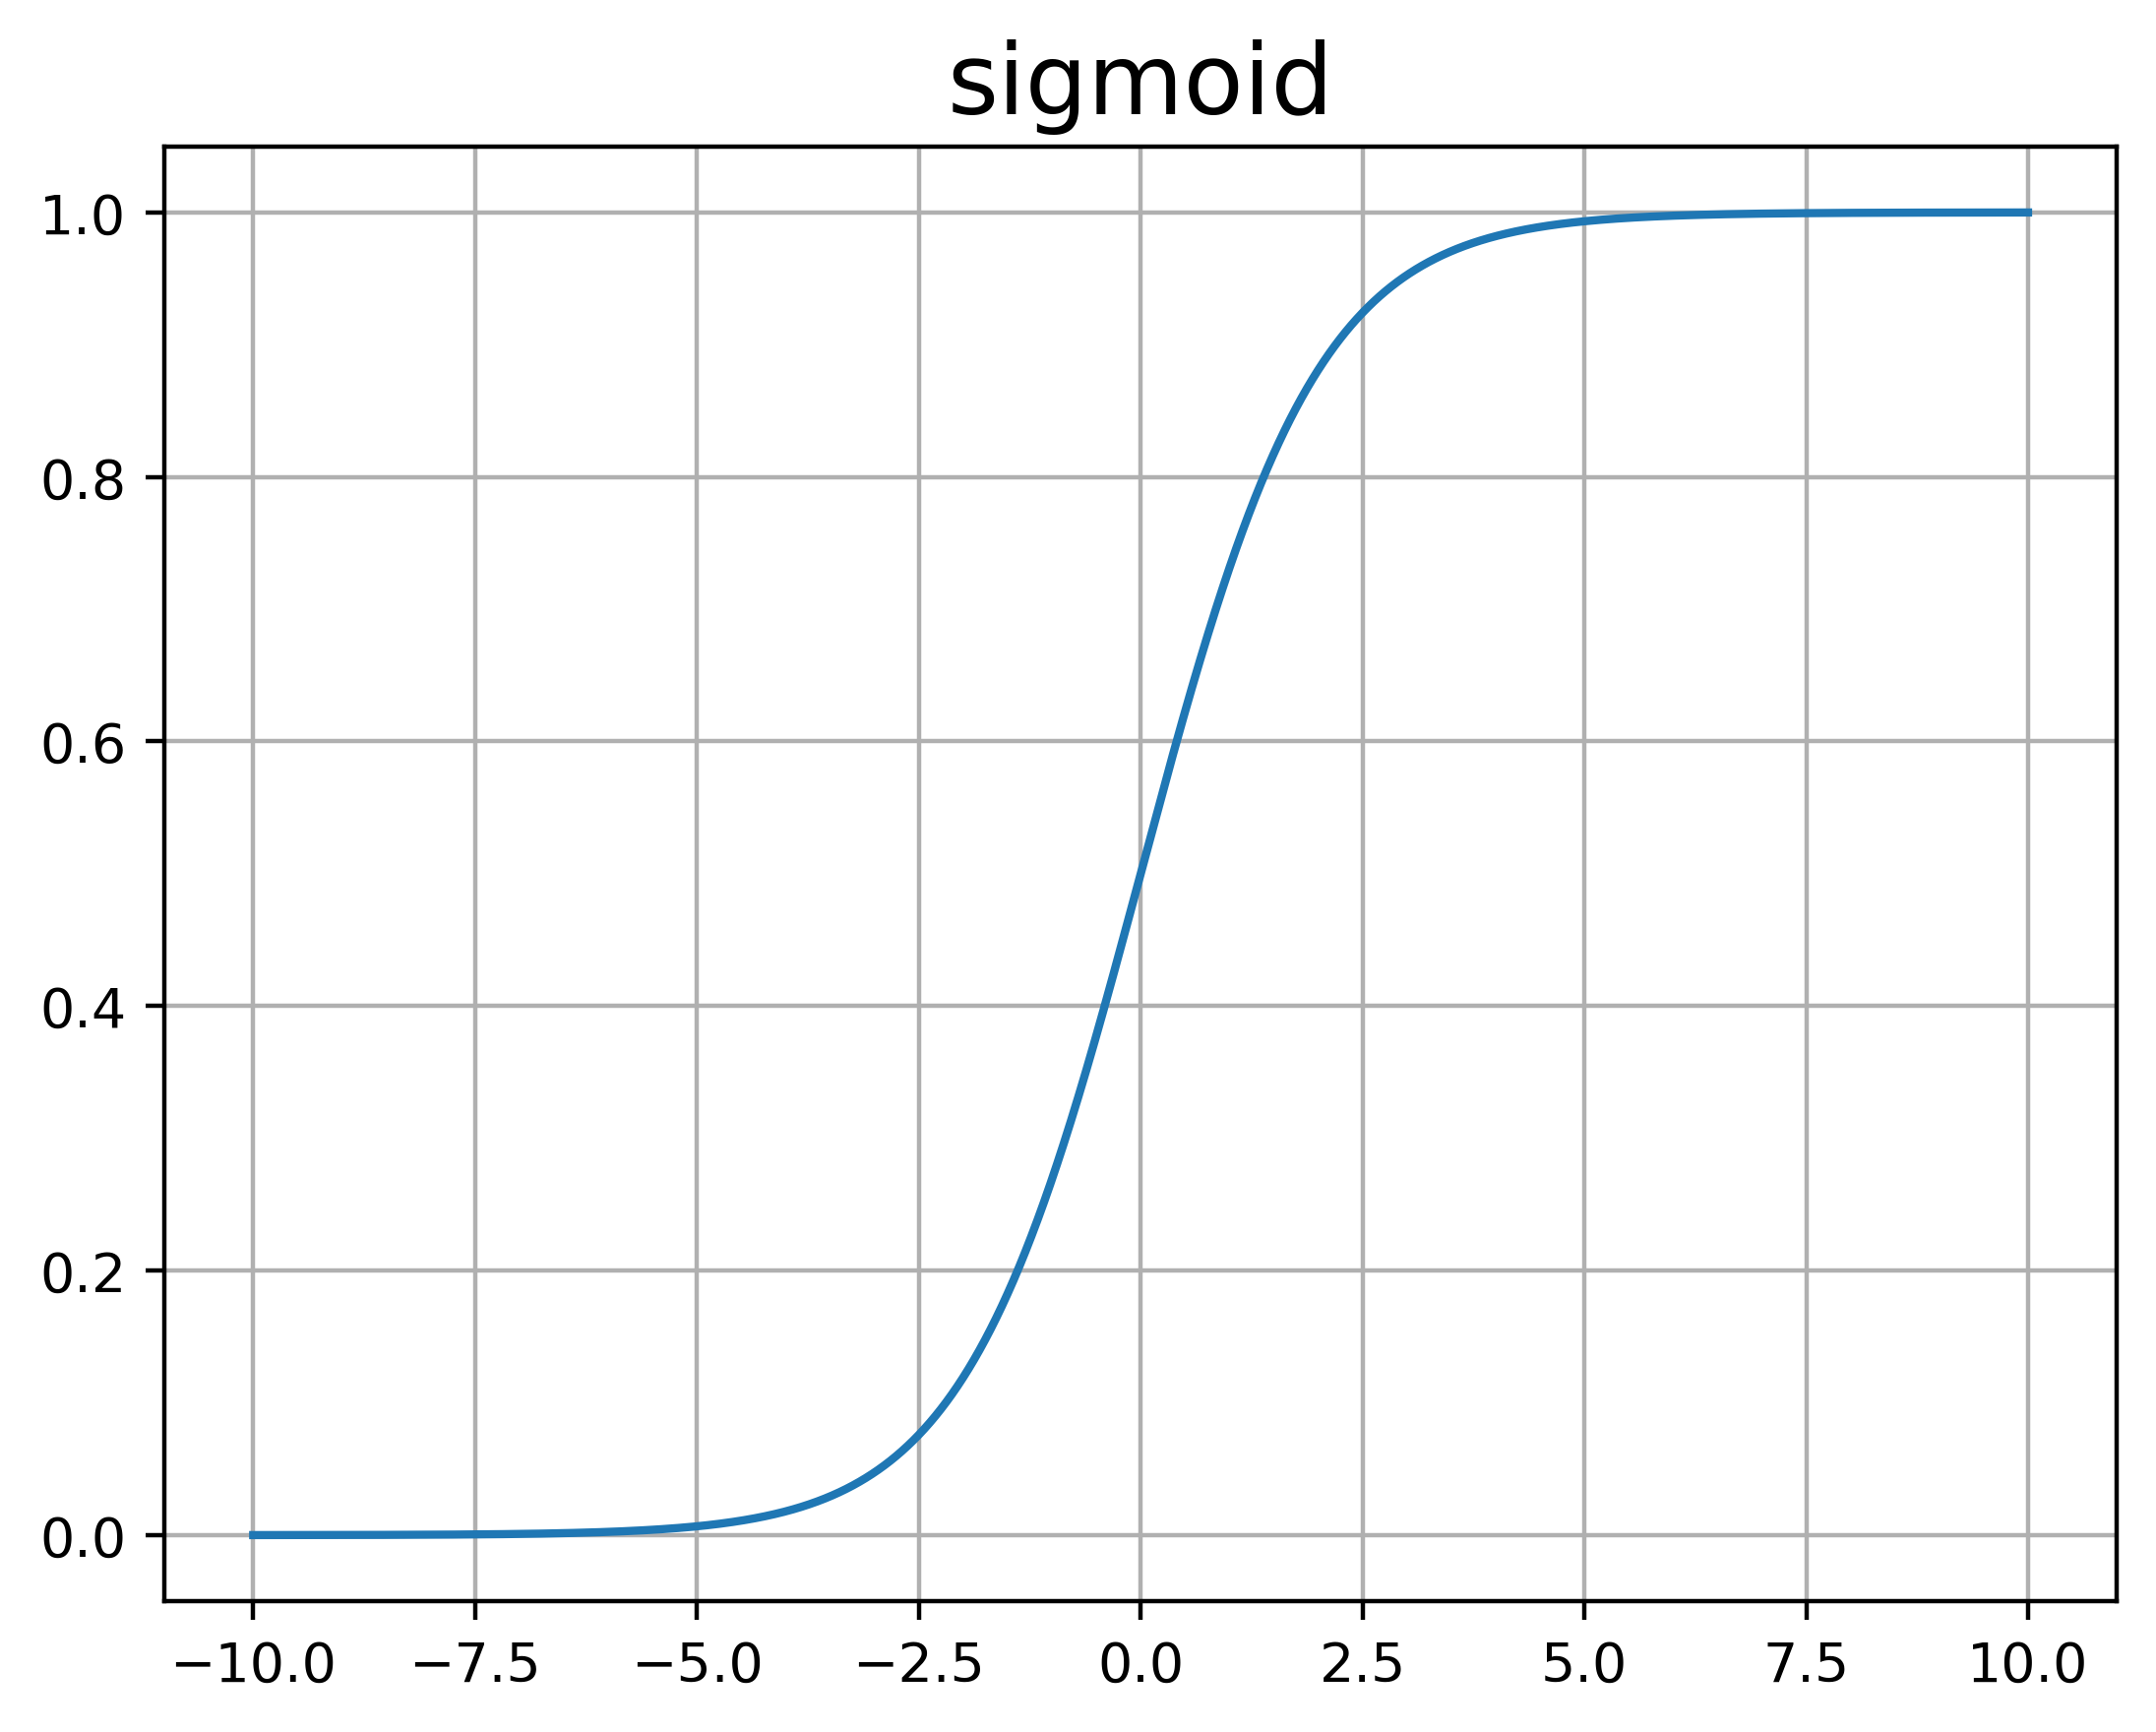 sigmoid.png